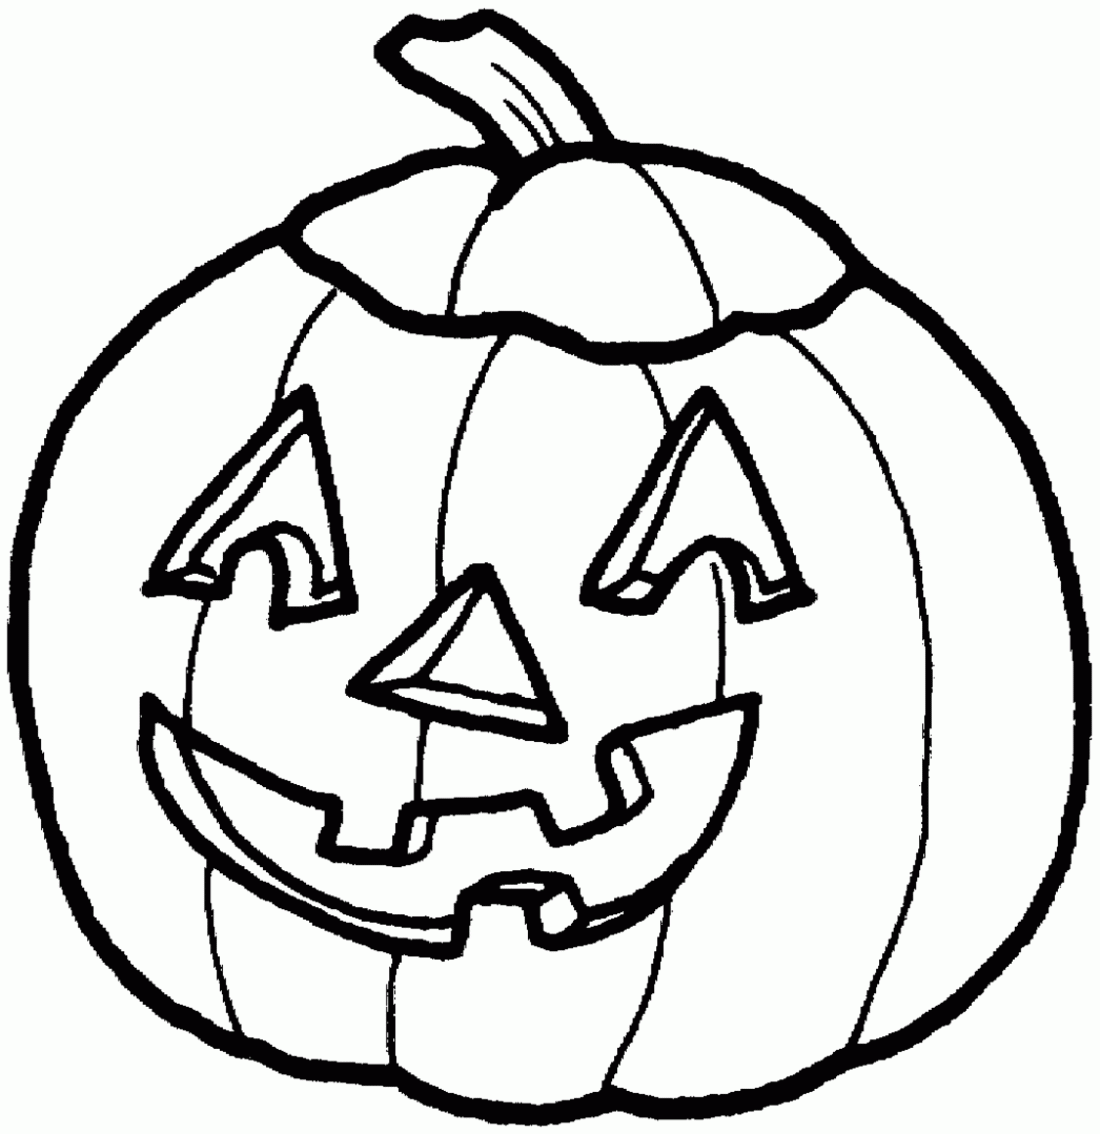 halloween pumpkins to color and print free printable pumpkin coloring pages for kids print color halloween pumpkins and to 